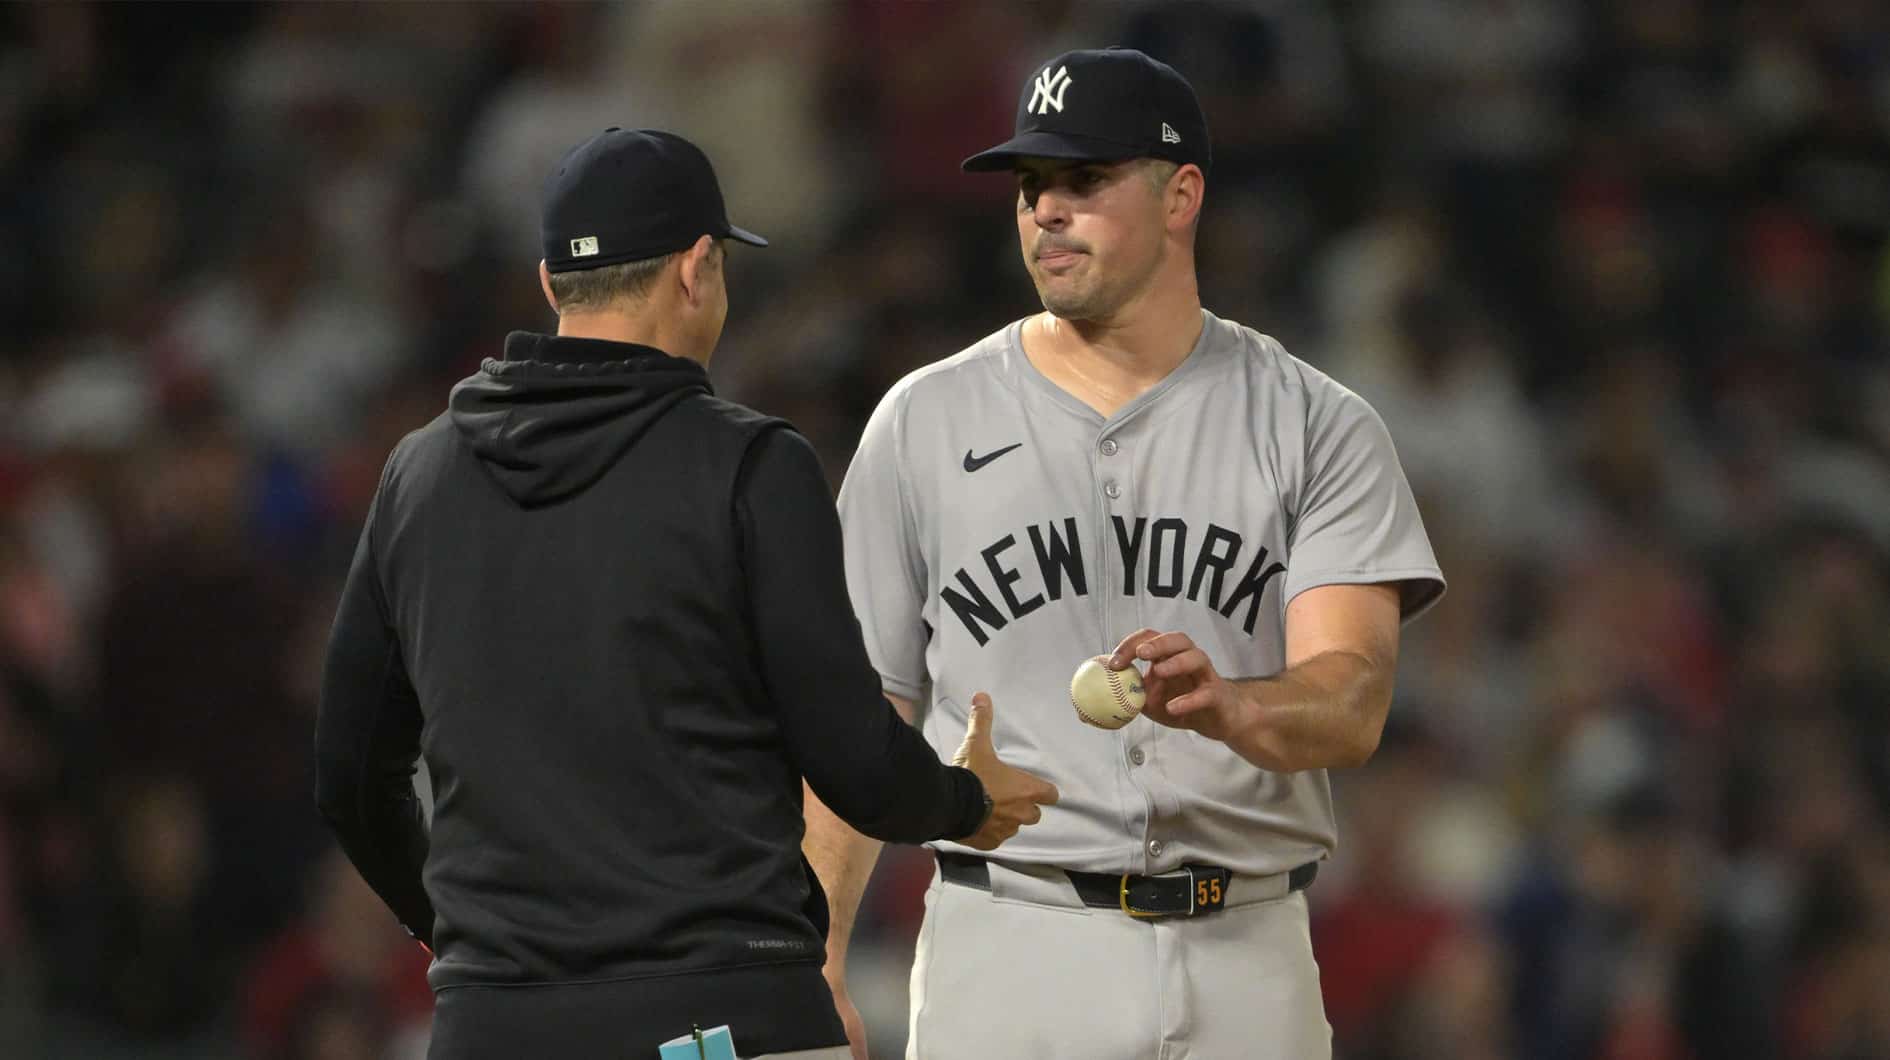 New York Yankees manager Aaron Boone (17) takes the ball from starting pitcher Carlos Rodon (55) as he leaves the game in the seventh inning against the Los Angeles Angels at Angel Stadium.